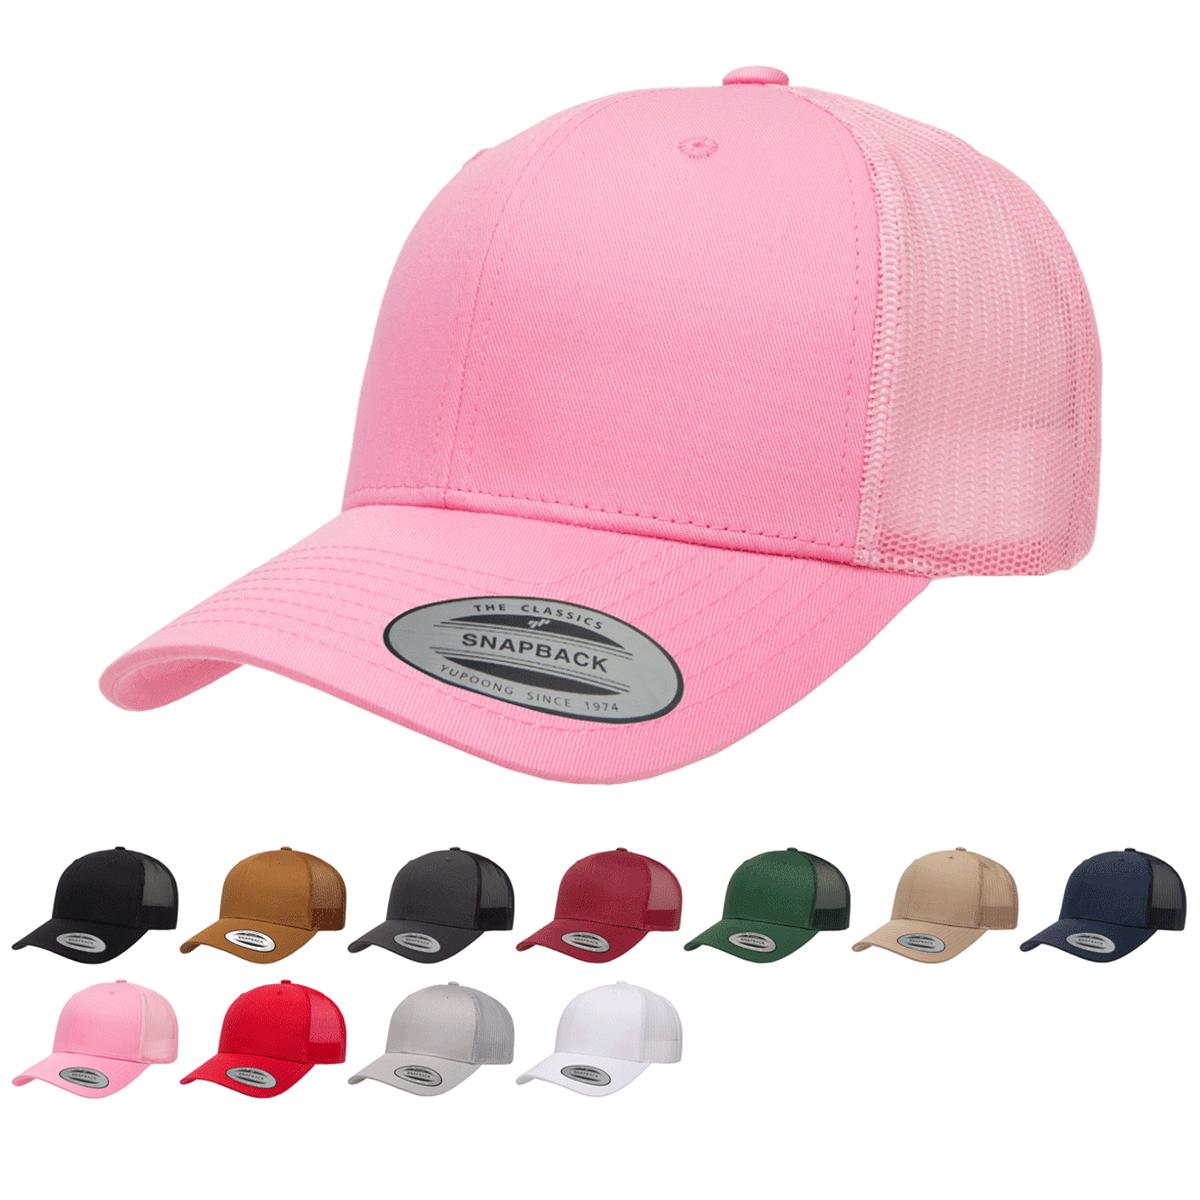 Yupoong 6606 – Baseball Hat, Back - Mesh Retro Park Wholesale with Cap Trucker The Class YP